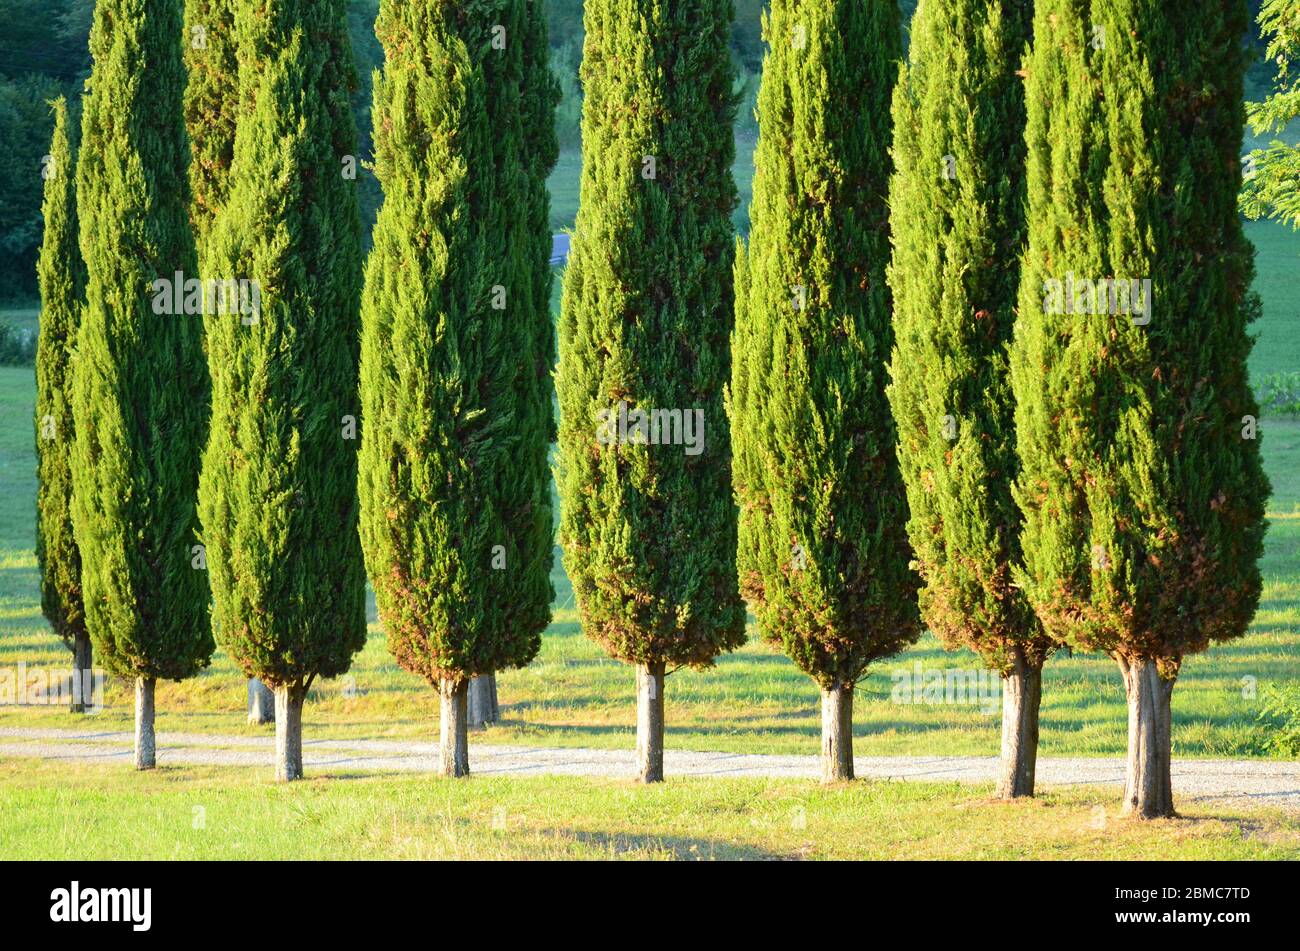 cupressus sempervirens trees in italy tuscany Stock Photo